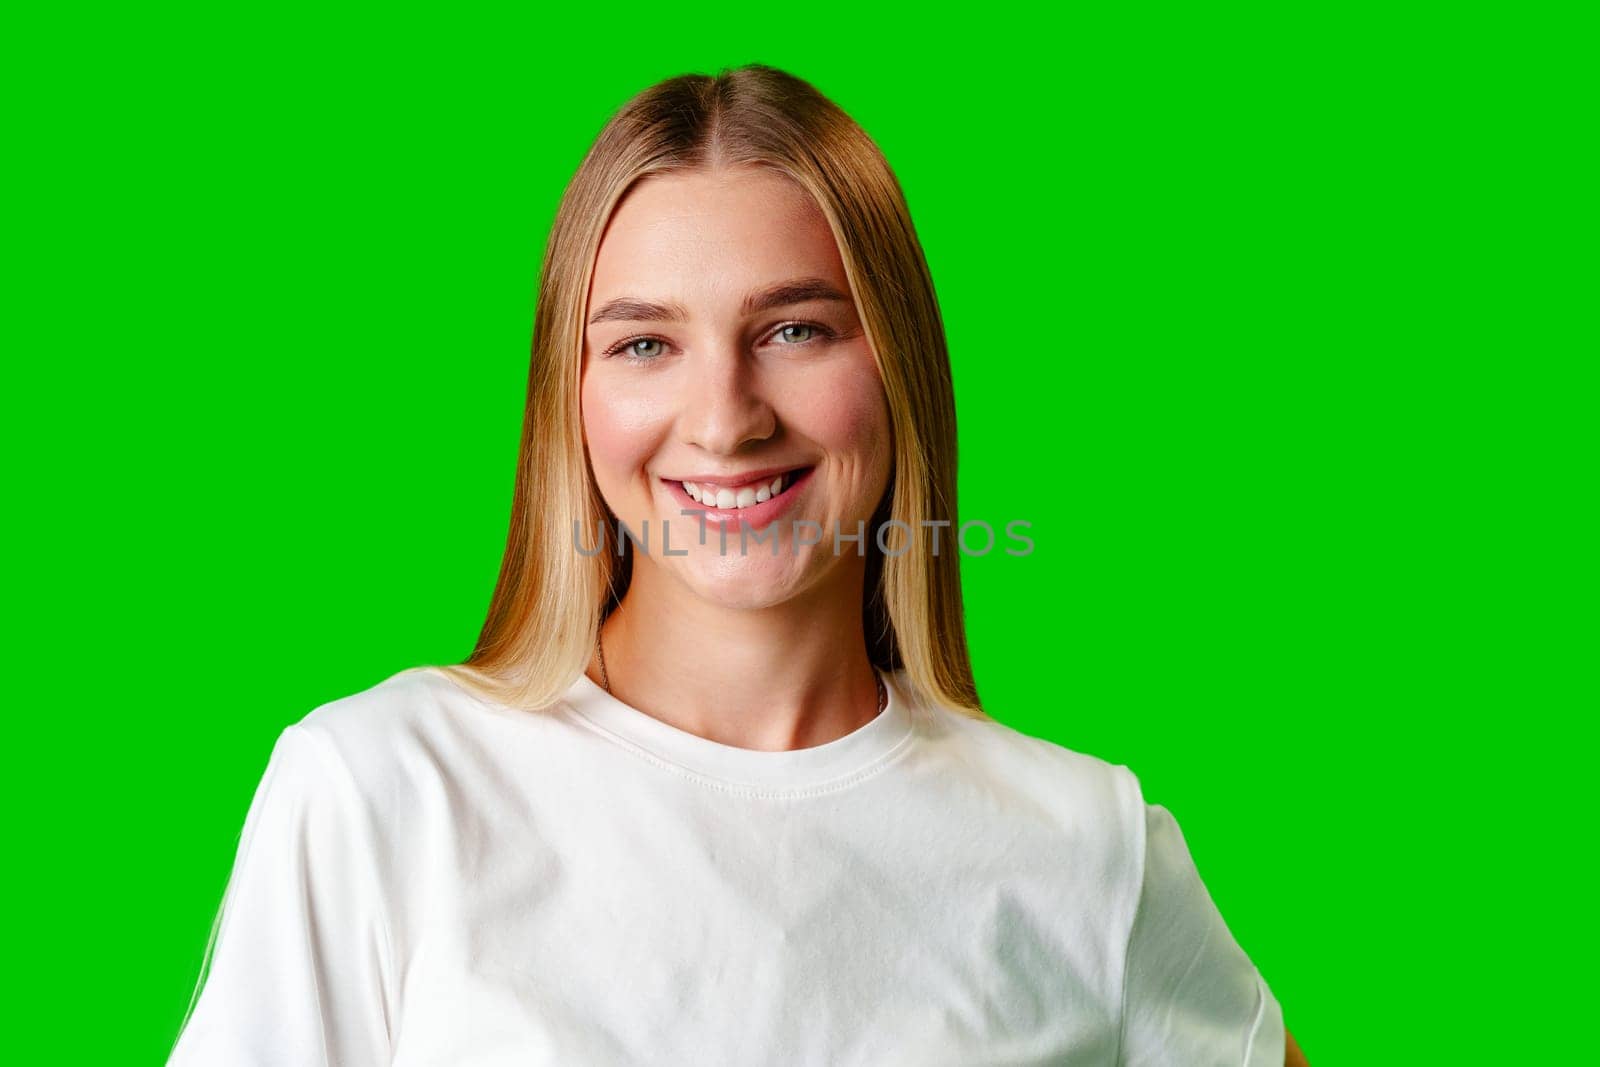 Young Woman in White Shirt Posing for Picture against green background by Fabrikasimf